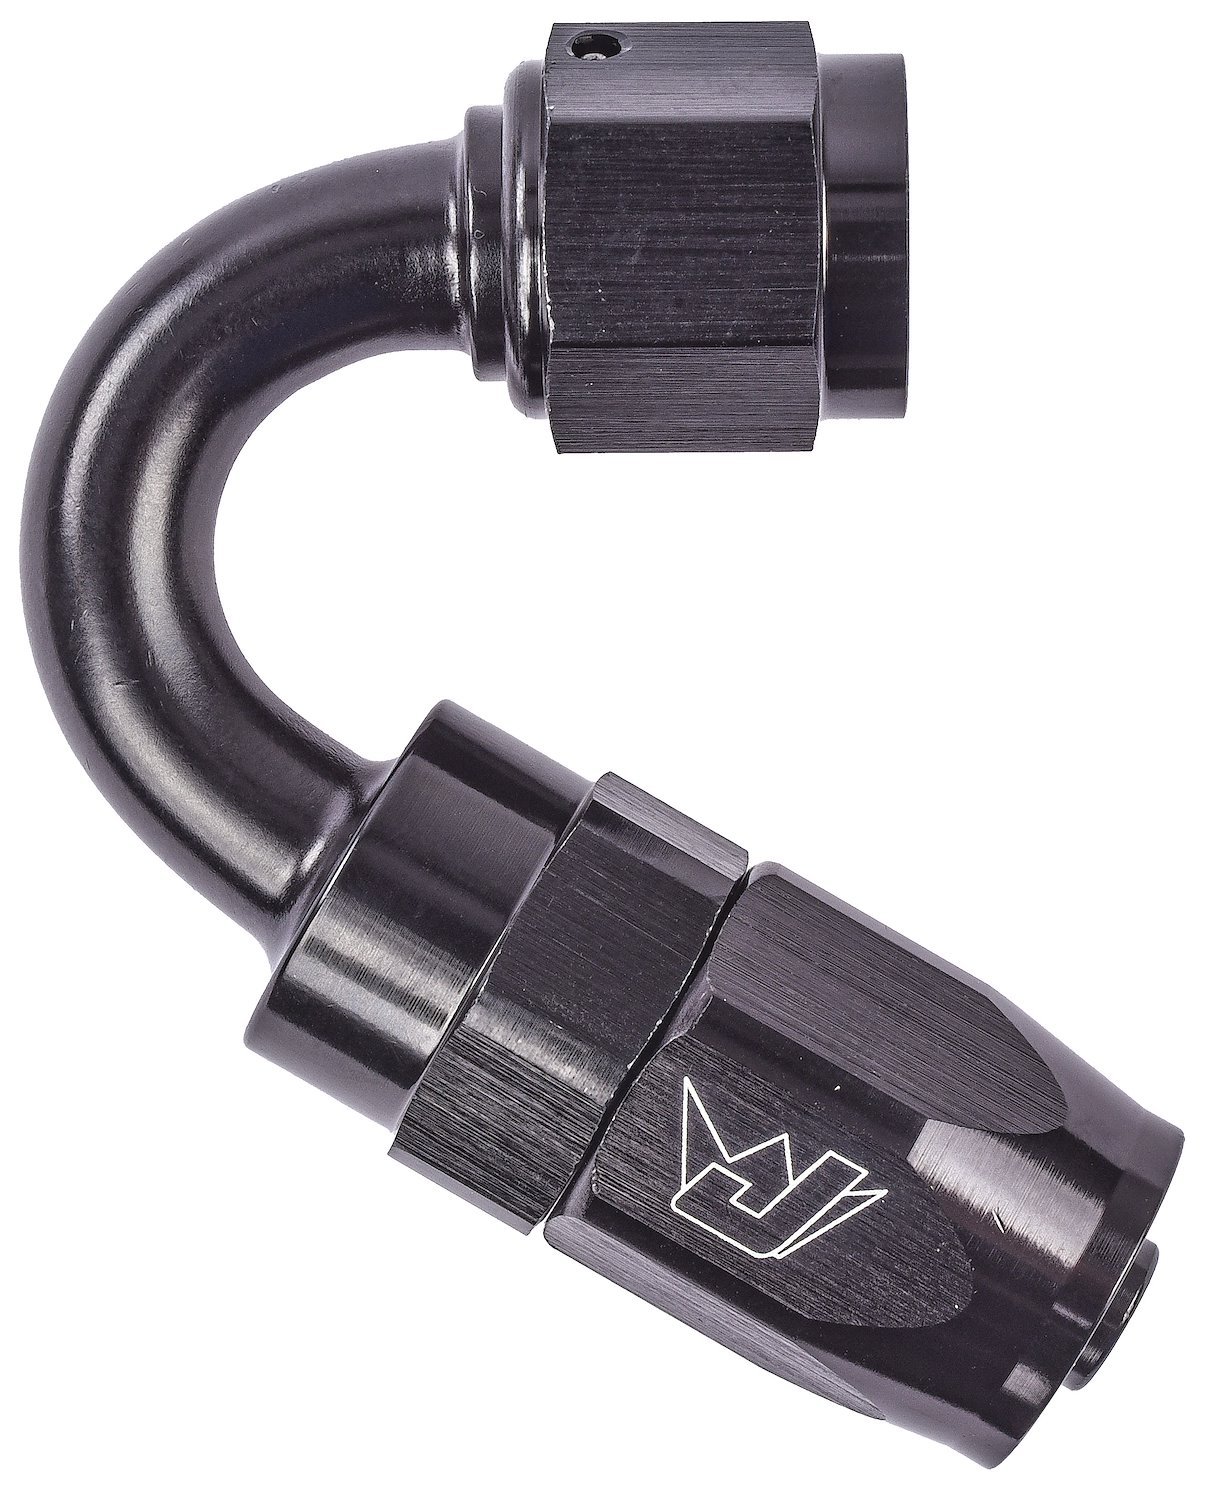 AN 150-Degree Max Flow Swivel Hose End [-6